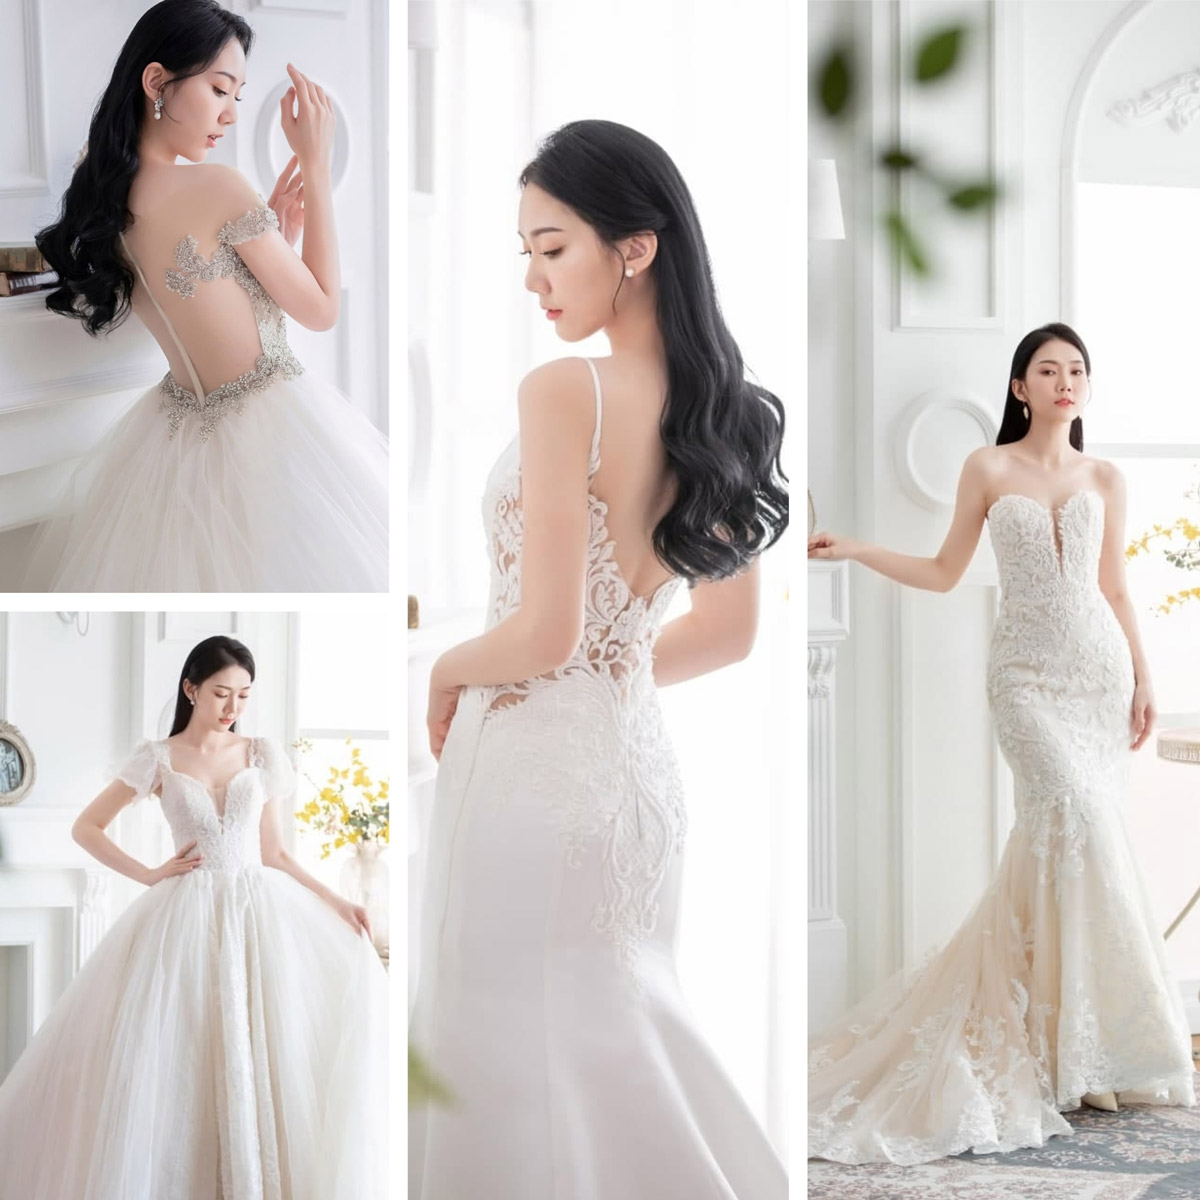 My Dream Wedding is Here to Make Your Dream Gown a Reality